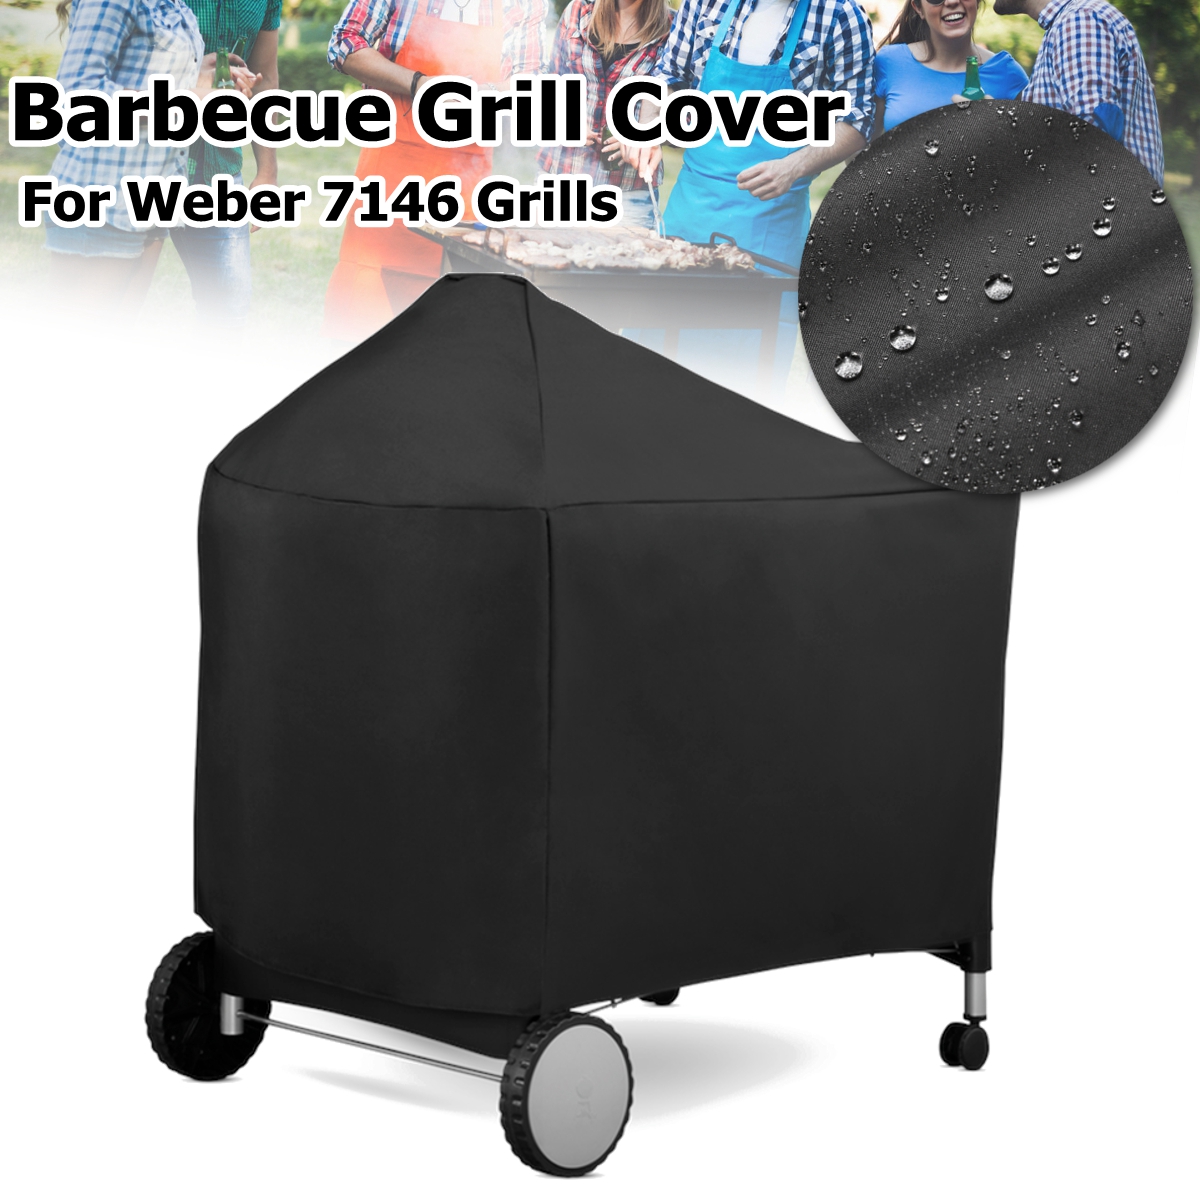 Waterproof-Barbecue-Grill-Cover-for-Weber-7146-Performer-Premium-and-Deluxe-1576280-2